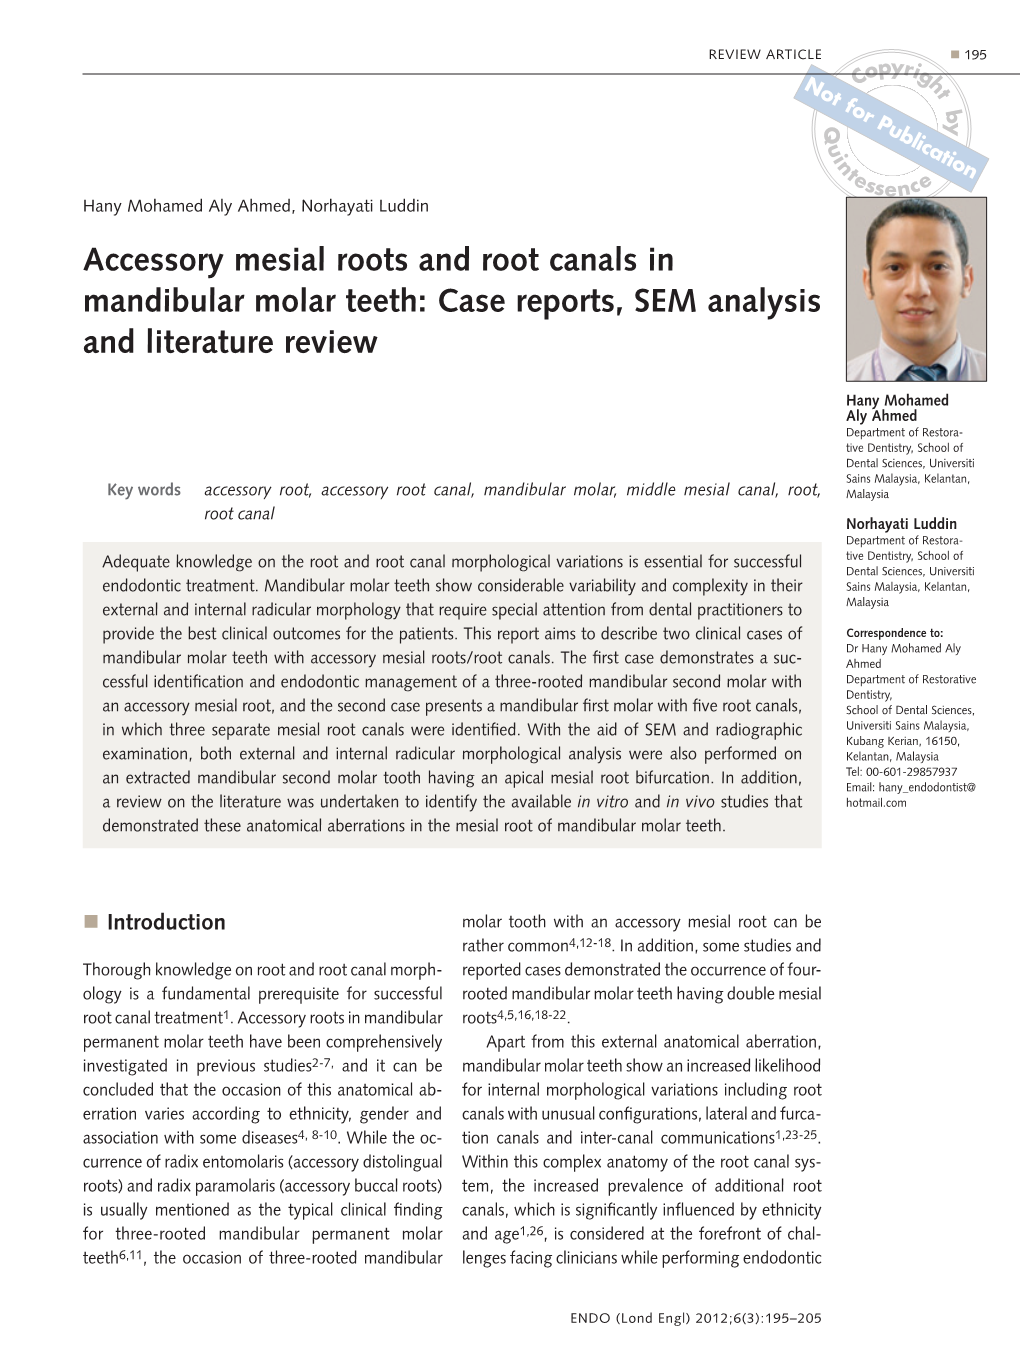 Accessory Mesial Roots and Root Canals in Mandibular Molar Teeth: Case Reports, SEM Analysis and Literature Review